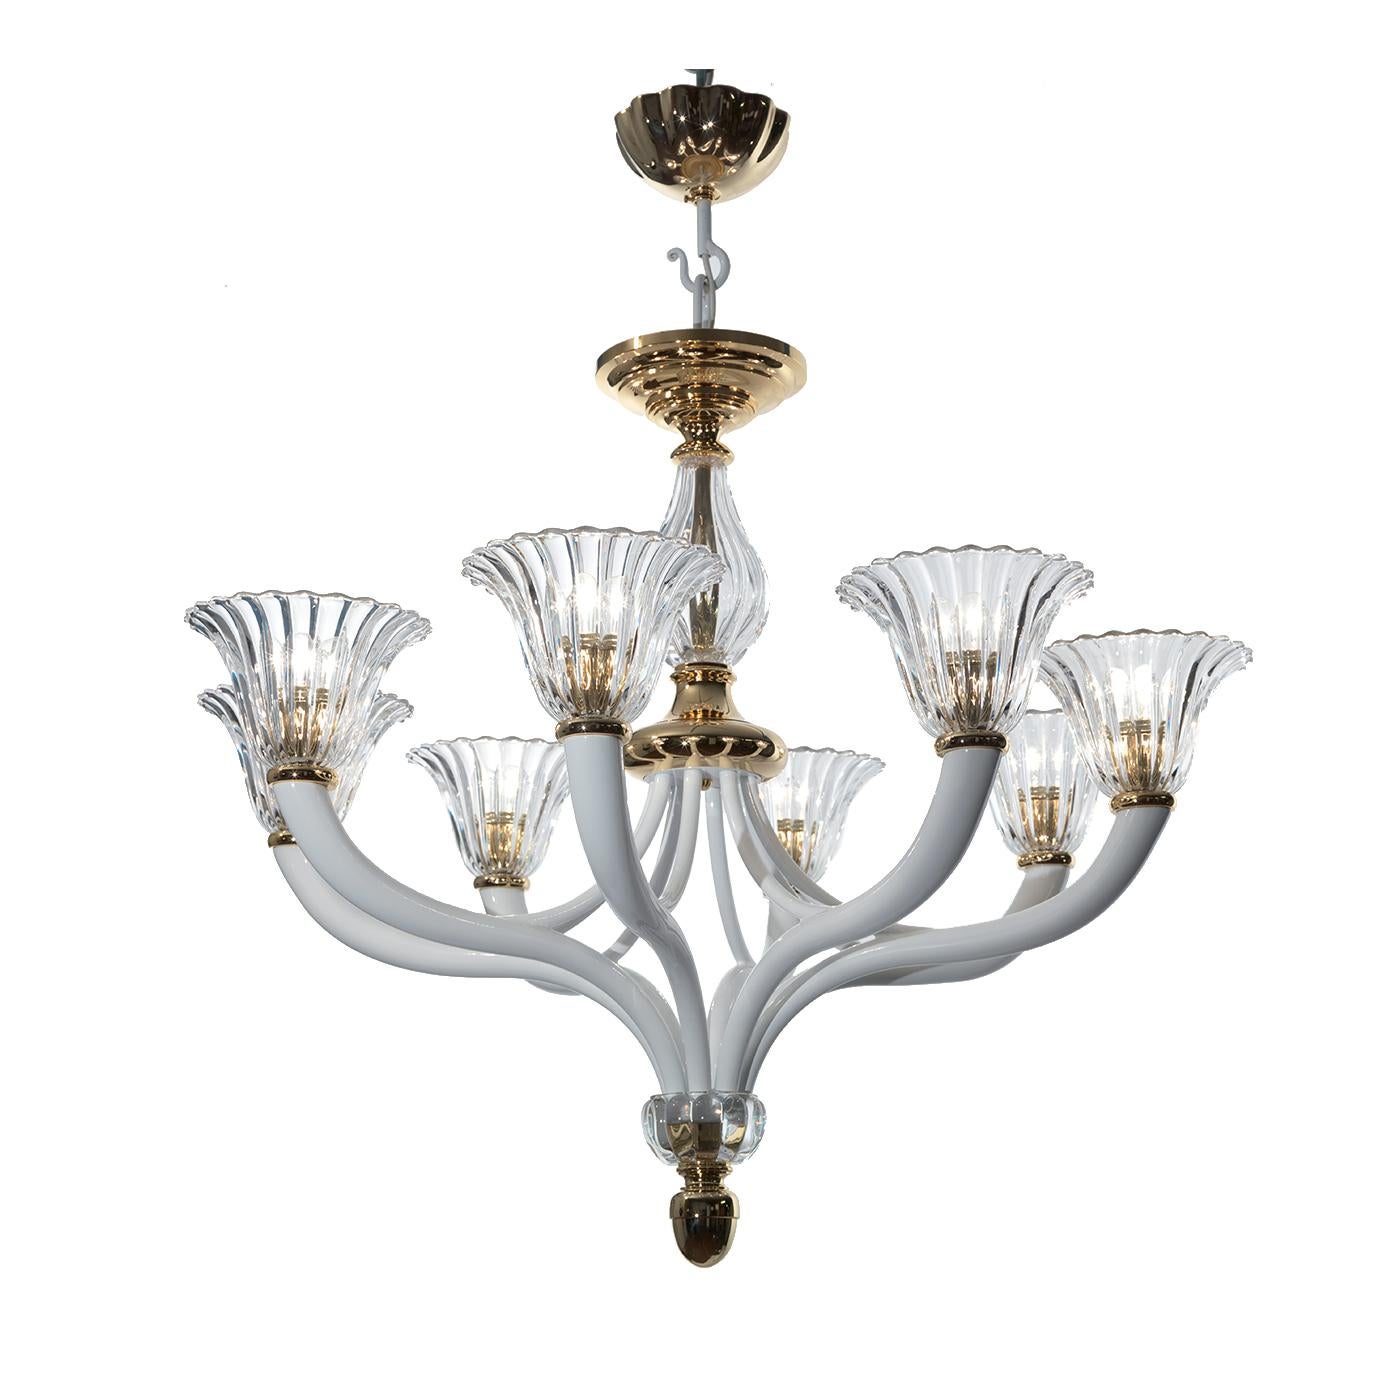 This magnificent piece of functional decor will enliven a Classic interior, thanks to its traditional-inspired Silhouette, the use of superb materials and finishes, and its masterful craftsmanship. Its structure hangs from a brass structure attached